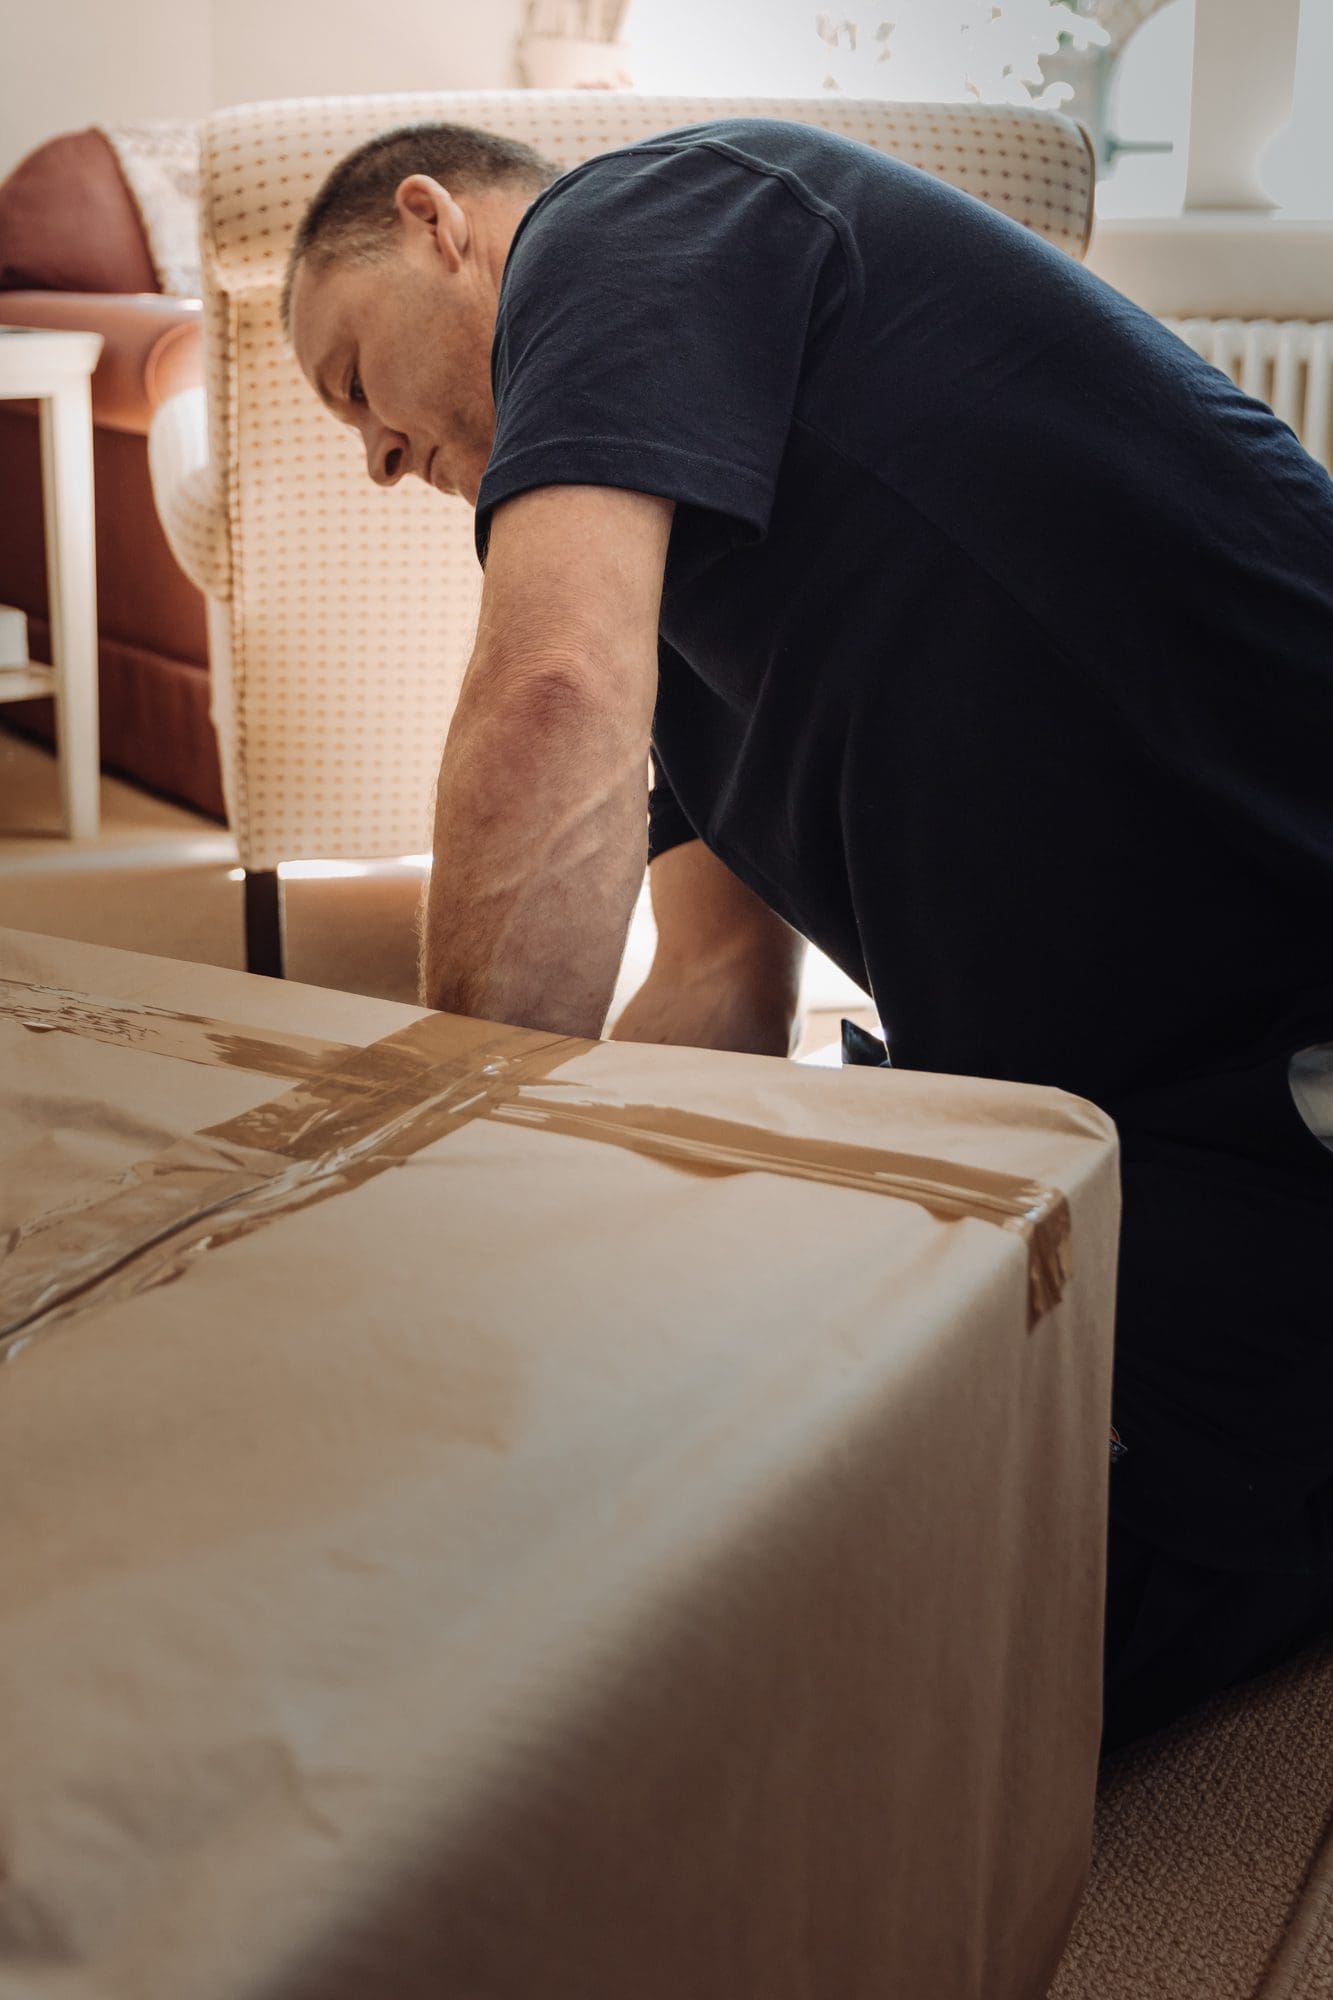 man taping and securing a packaging for a safety removals